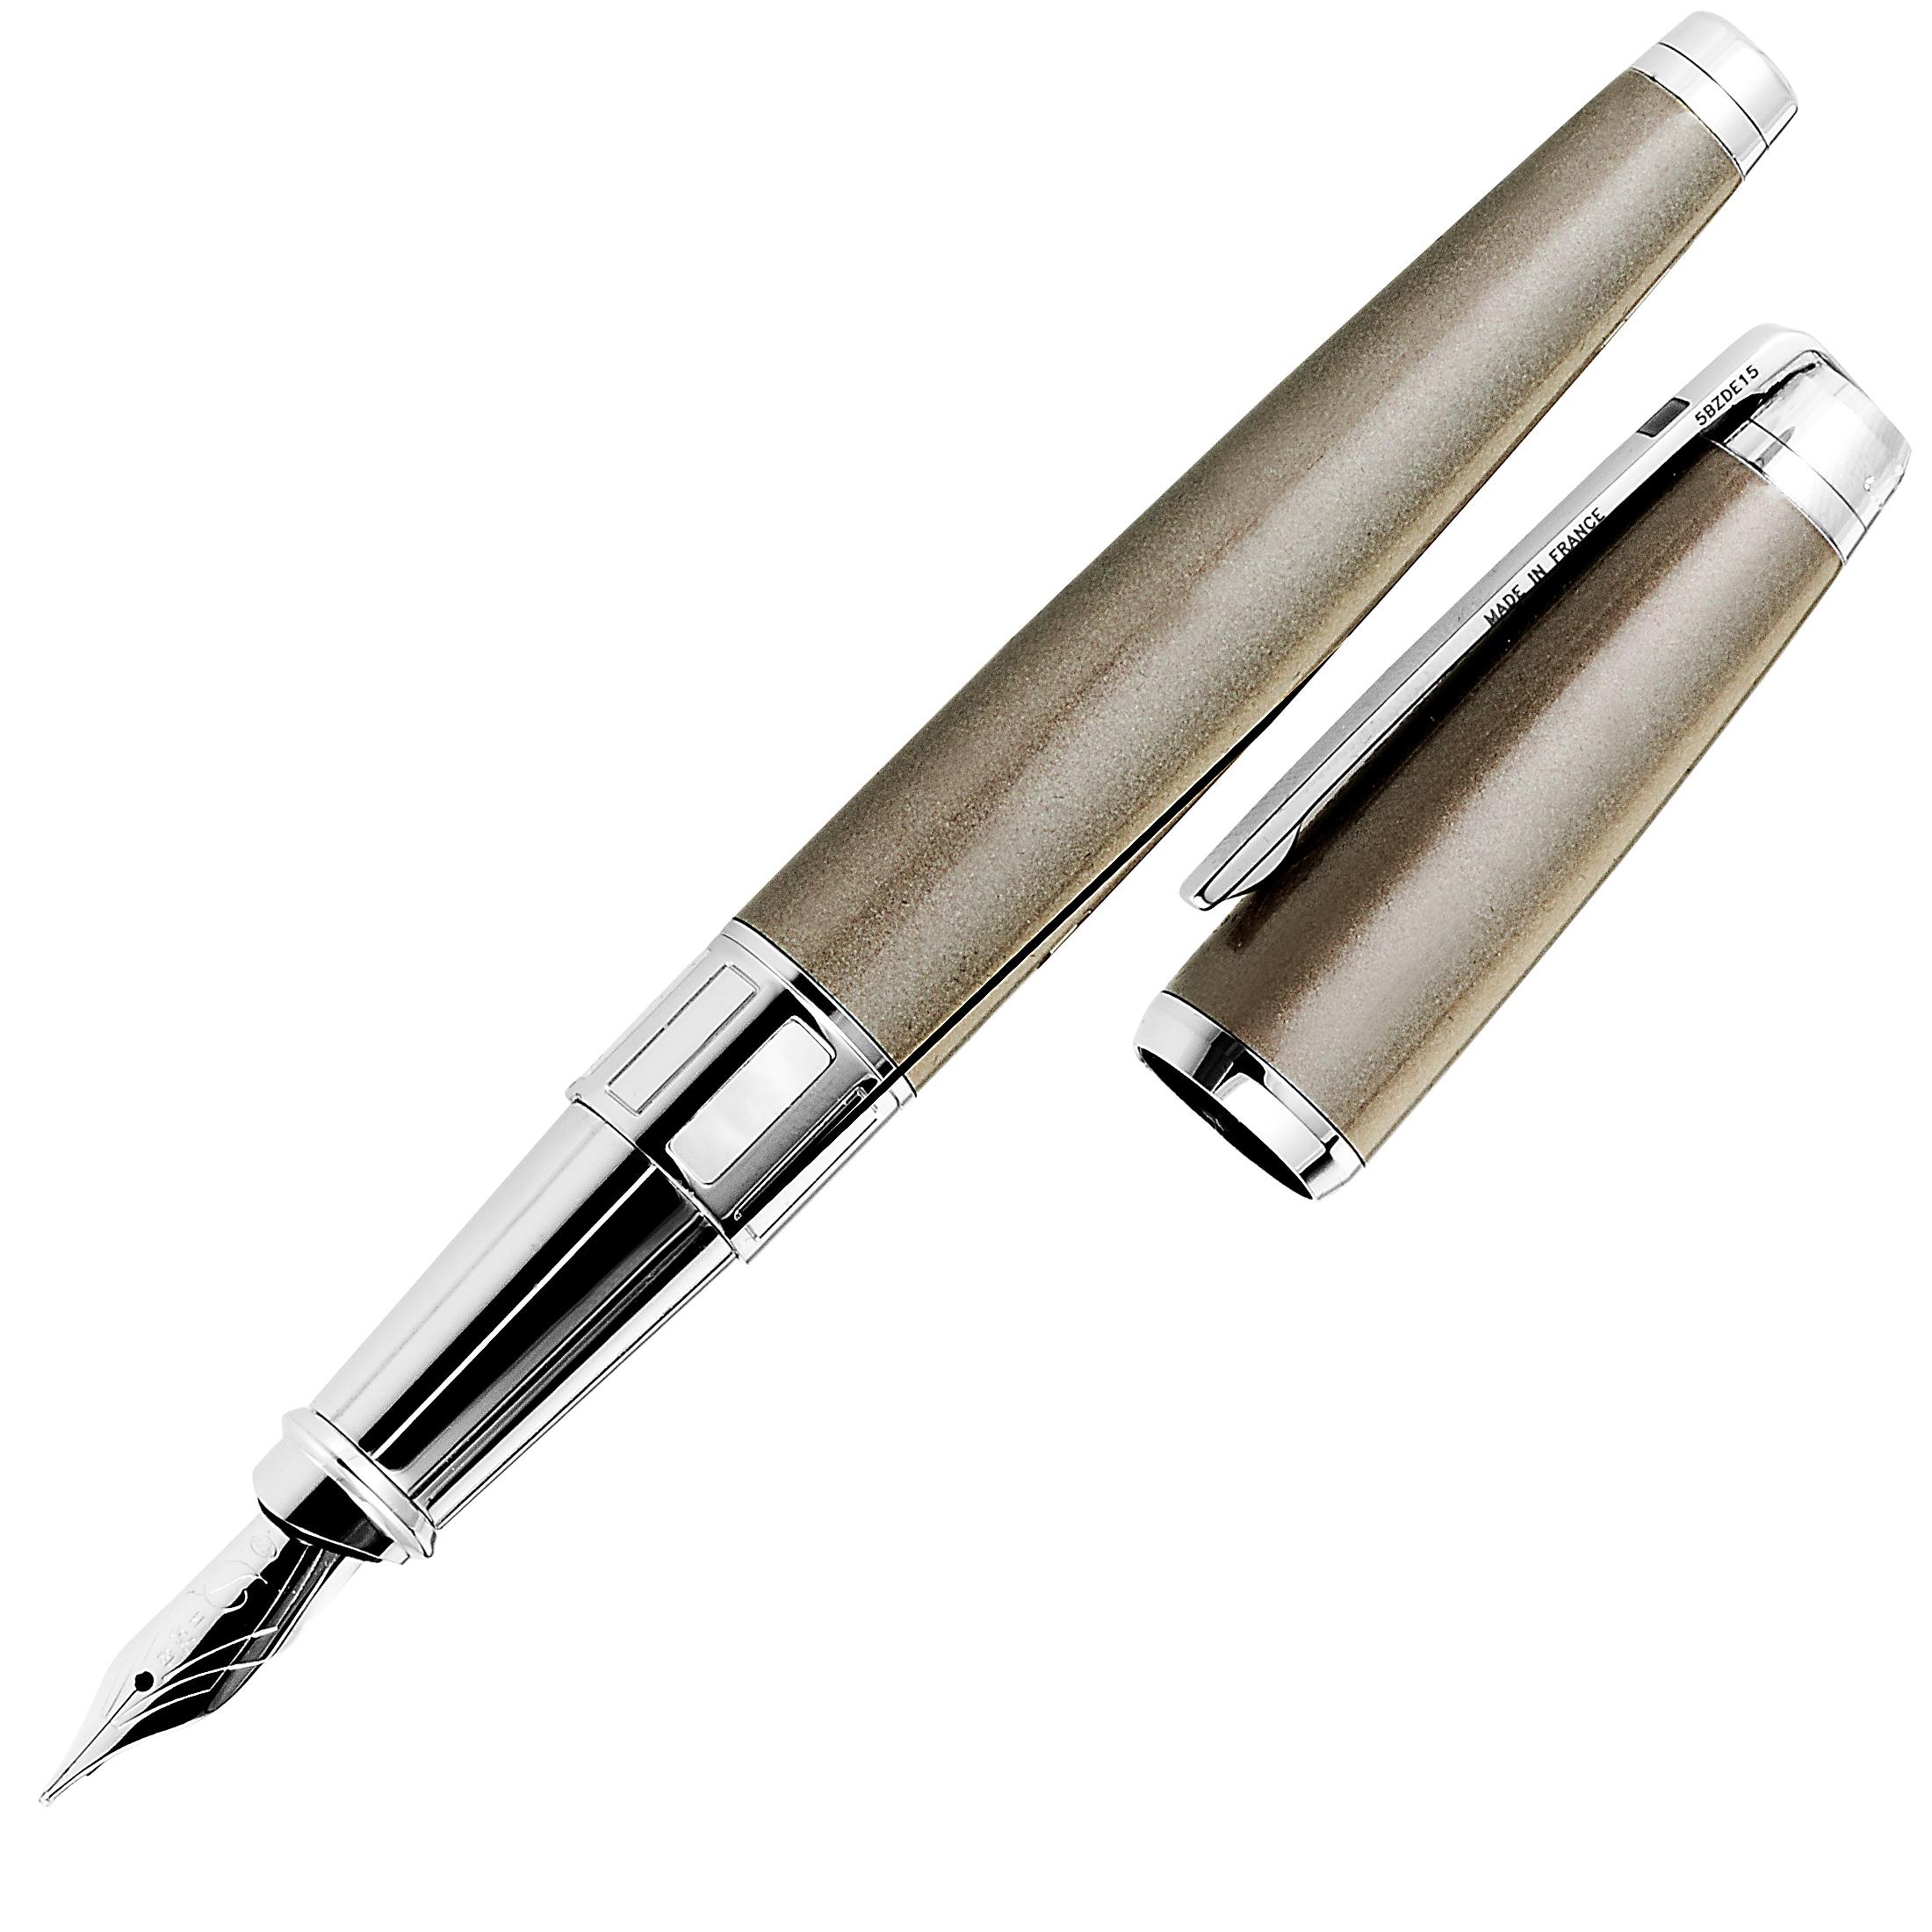 A vision of sophisticated refinement, this sublime fountain pen boasts splendid mocha mother-of-pearl lacquer that is beautifully complemented by elegant palladium finishes. The pen boasts a solid 18K white gold nib and it is presented by S.T.